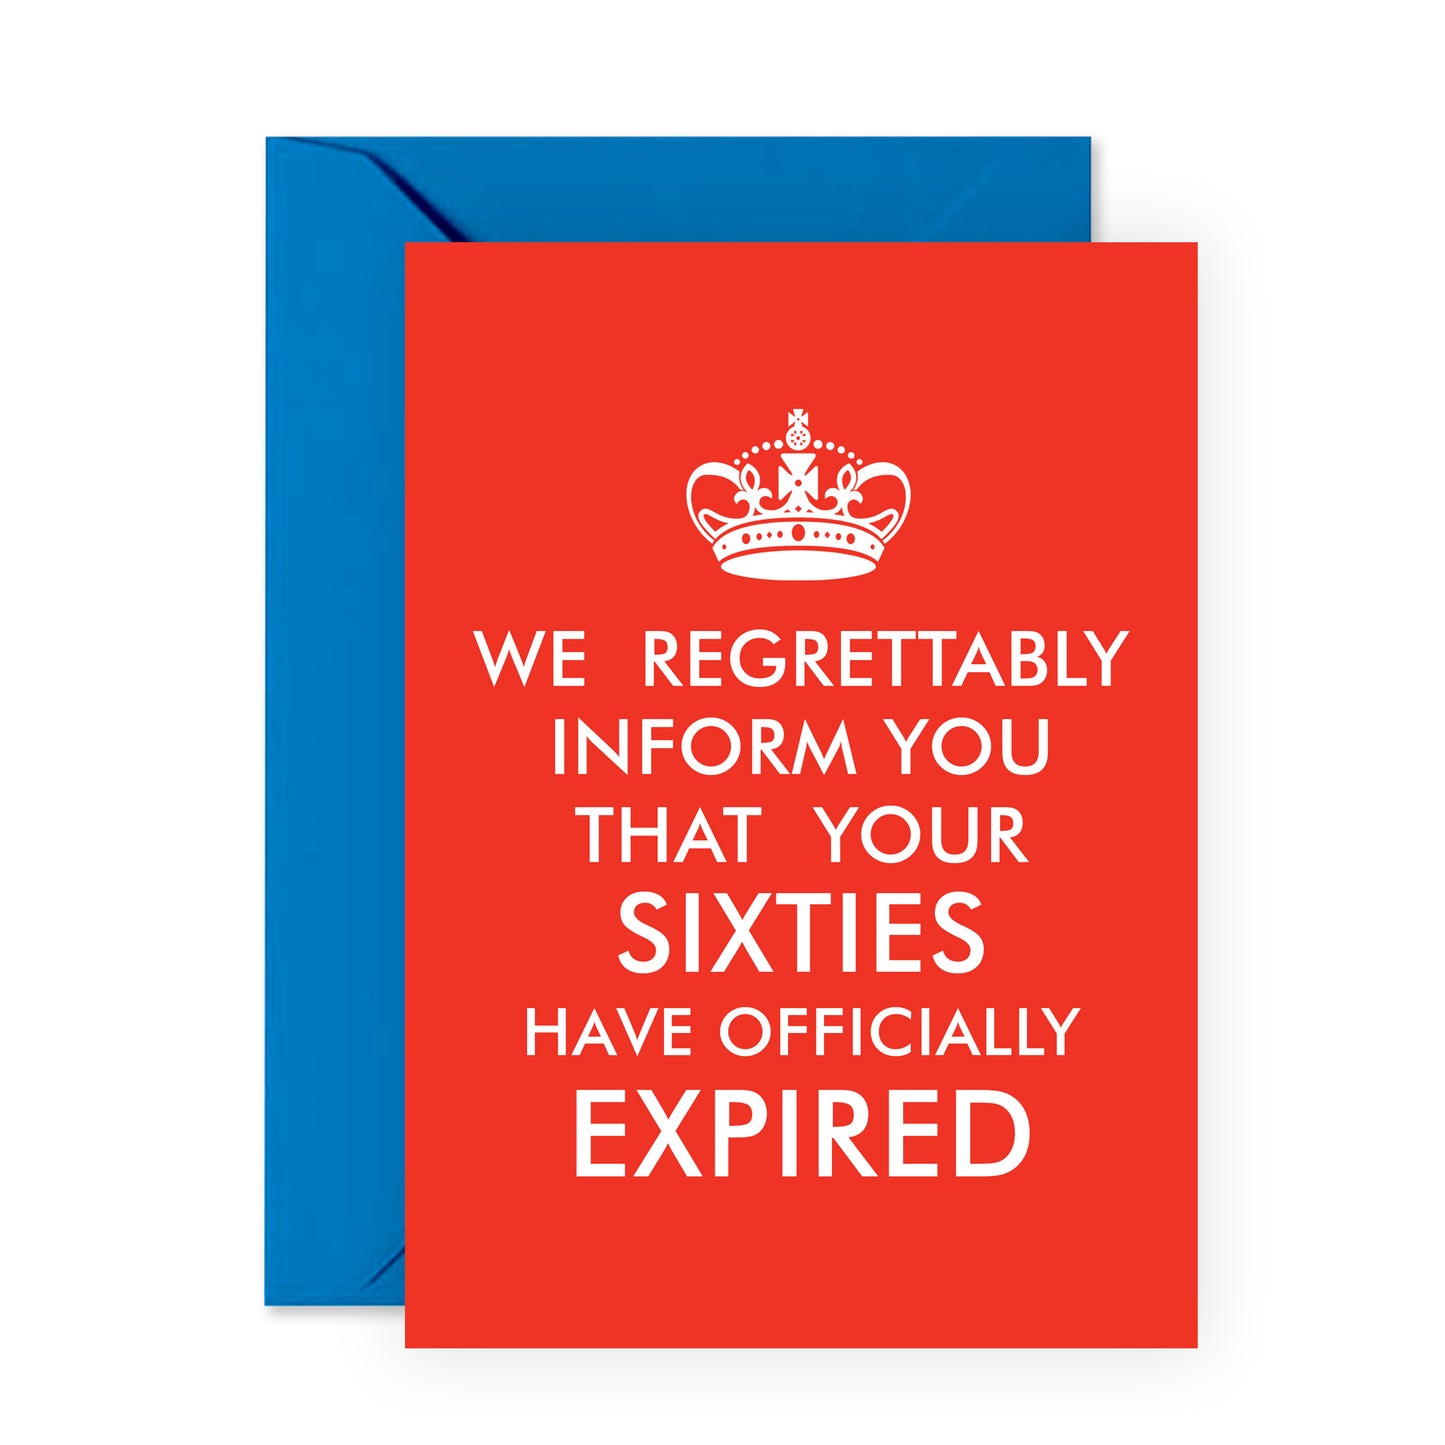 Funny 70th Birthday Card - Sixties Have Expired - For Men Women Him Her